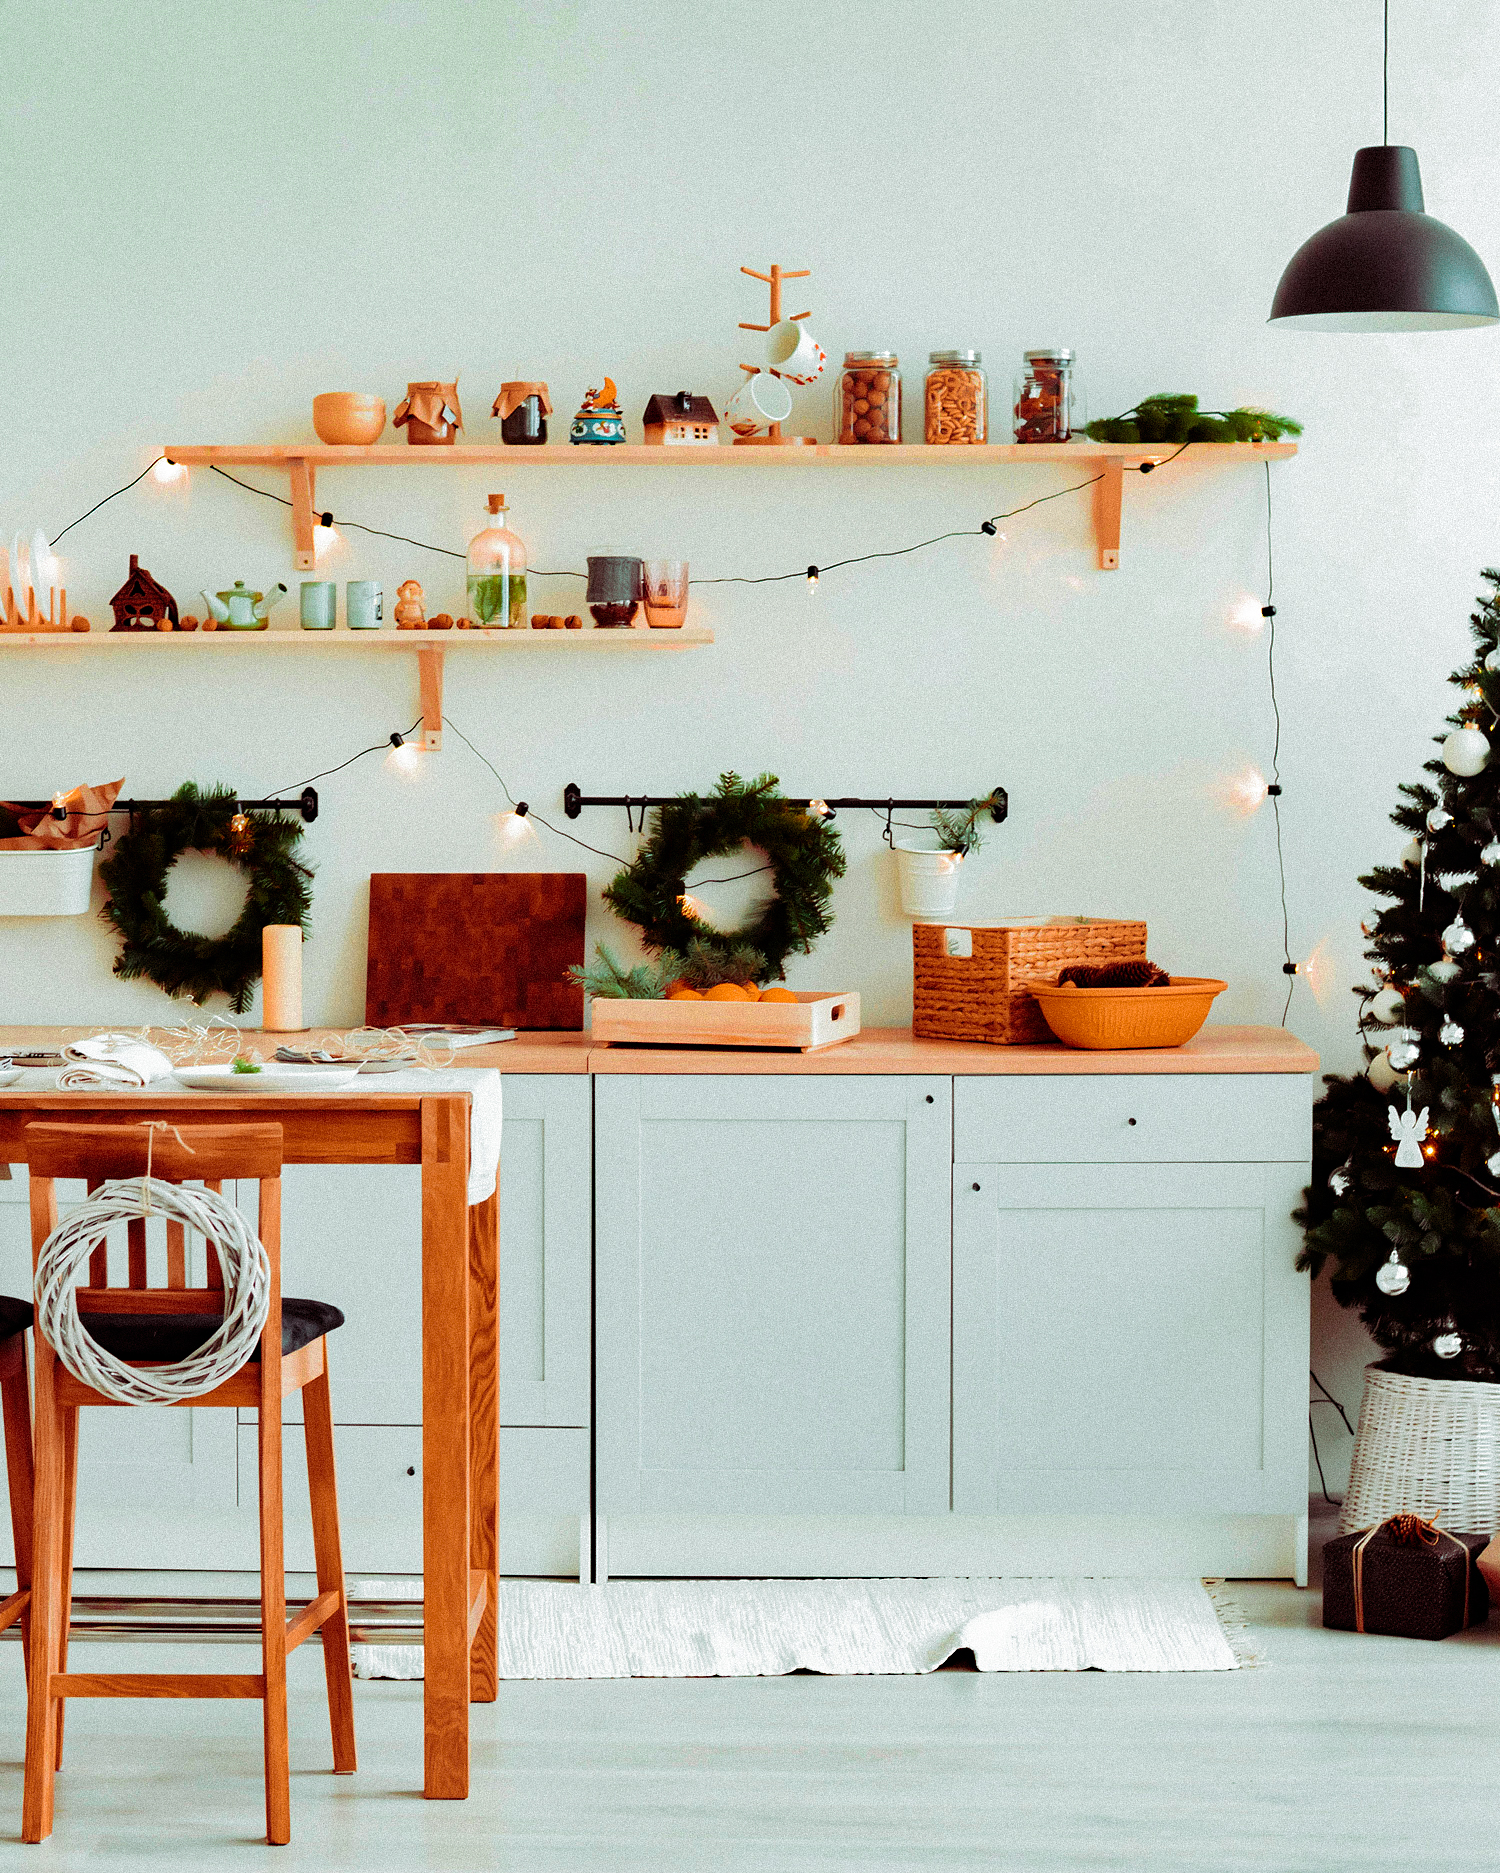 Christmas kitchen decor. The rustic kitchen for Christmas. Details of Scandinavian cuisine in light color.